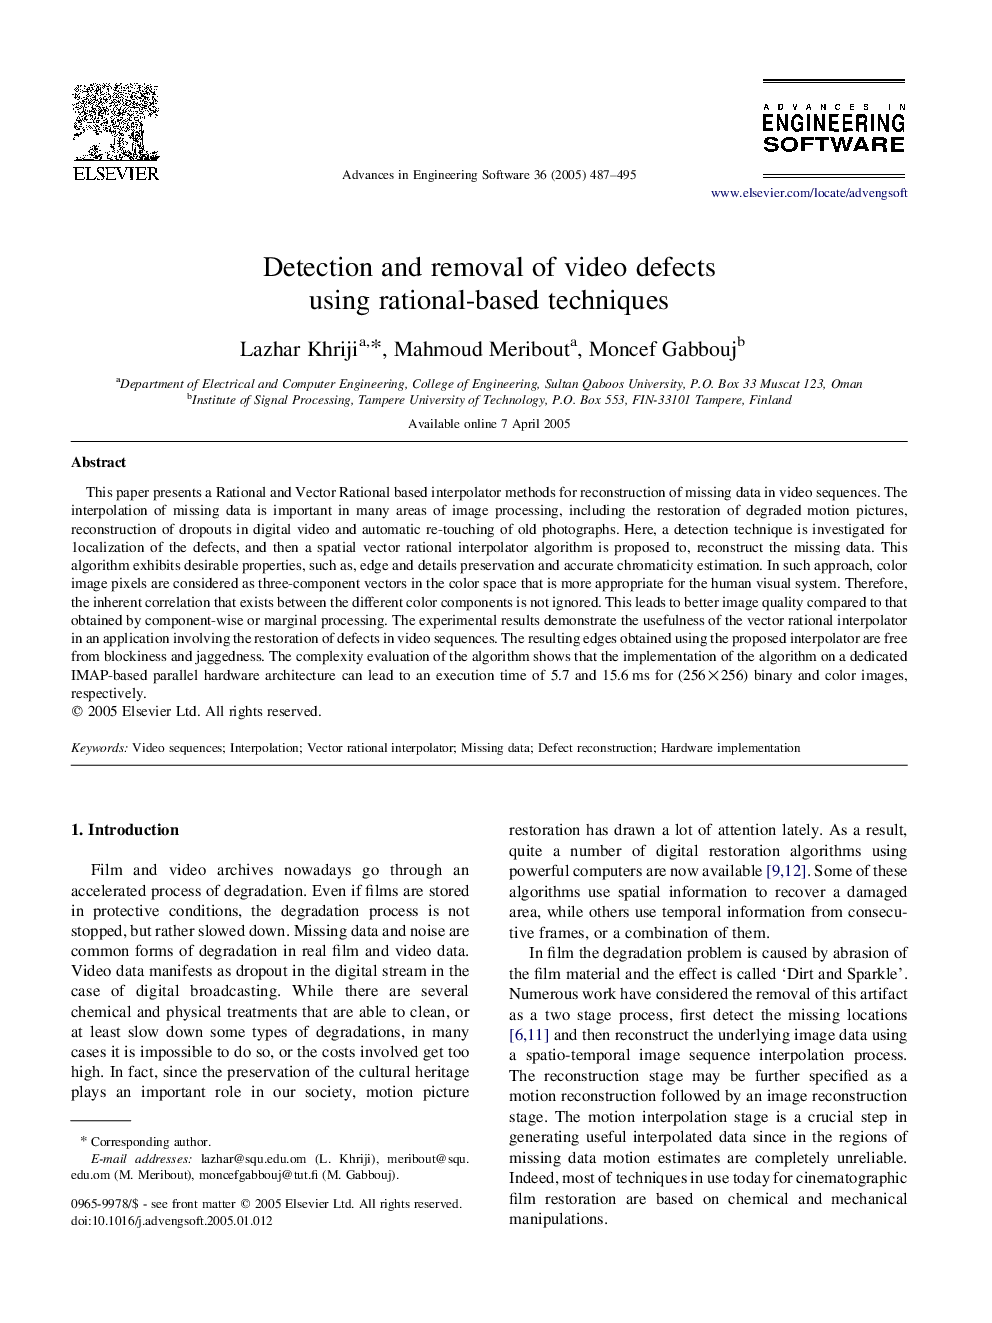 Detection and removal of video defects using rational-based techniques